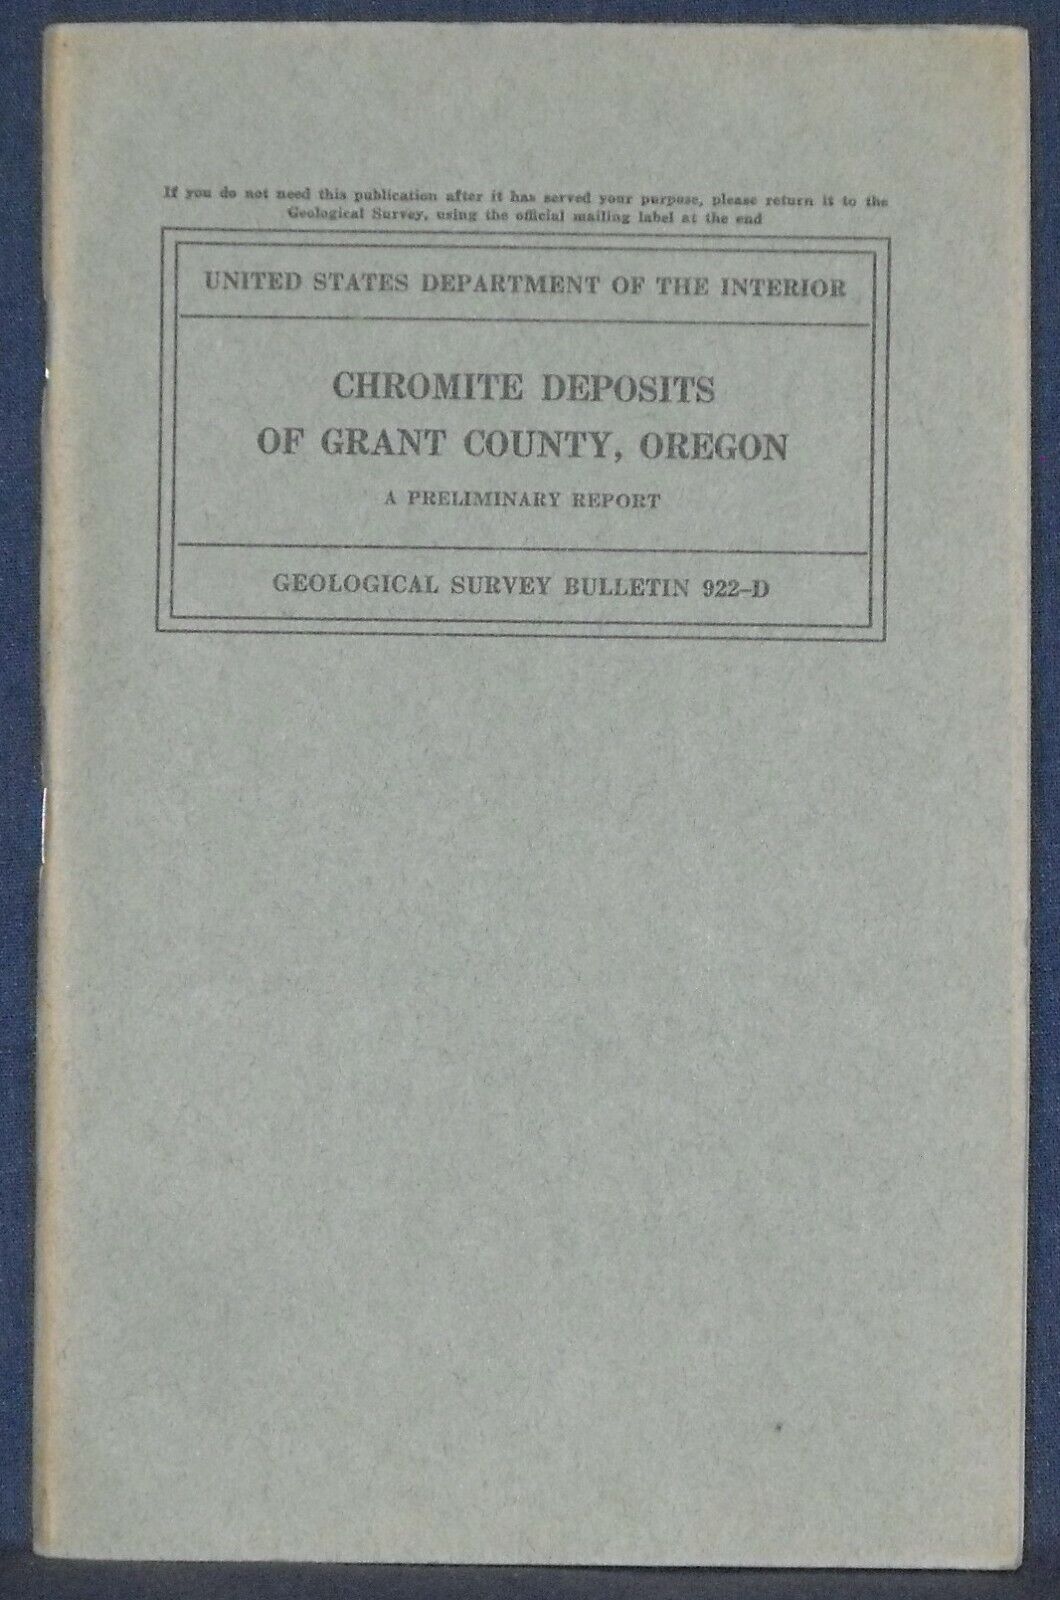 USGS OREGON CHROMITE DEPOSITS of GRANT COUNTY Vintage 1940 With SIX MAPS